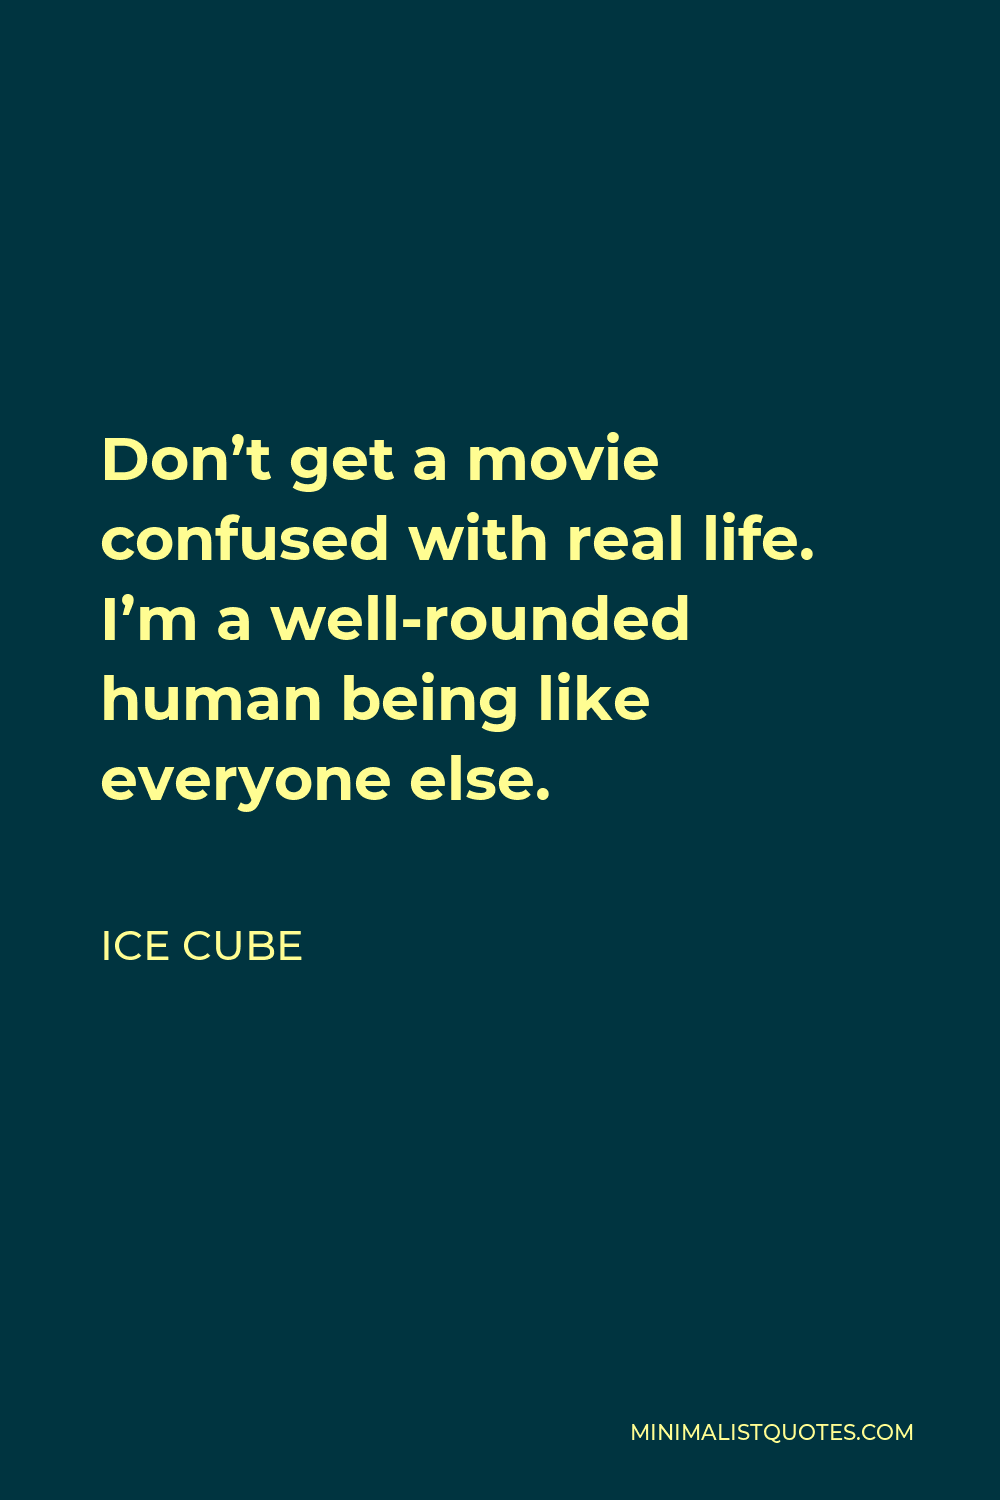 Ice Cube Quote - Don’t get a movie confused with real life. I’m a well-rounded human being like everyone else.